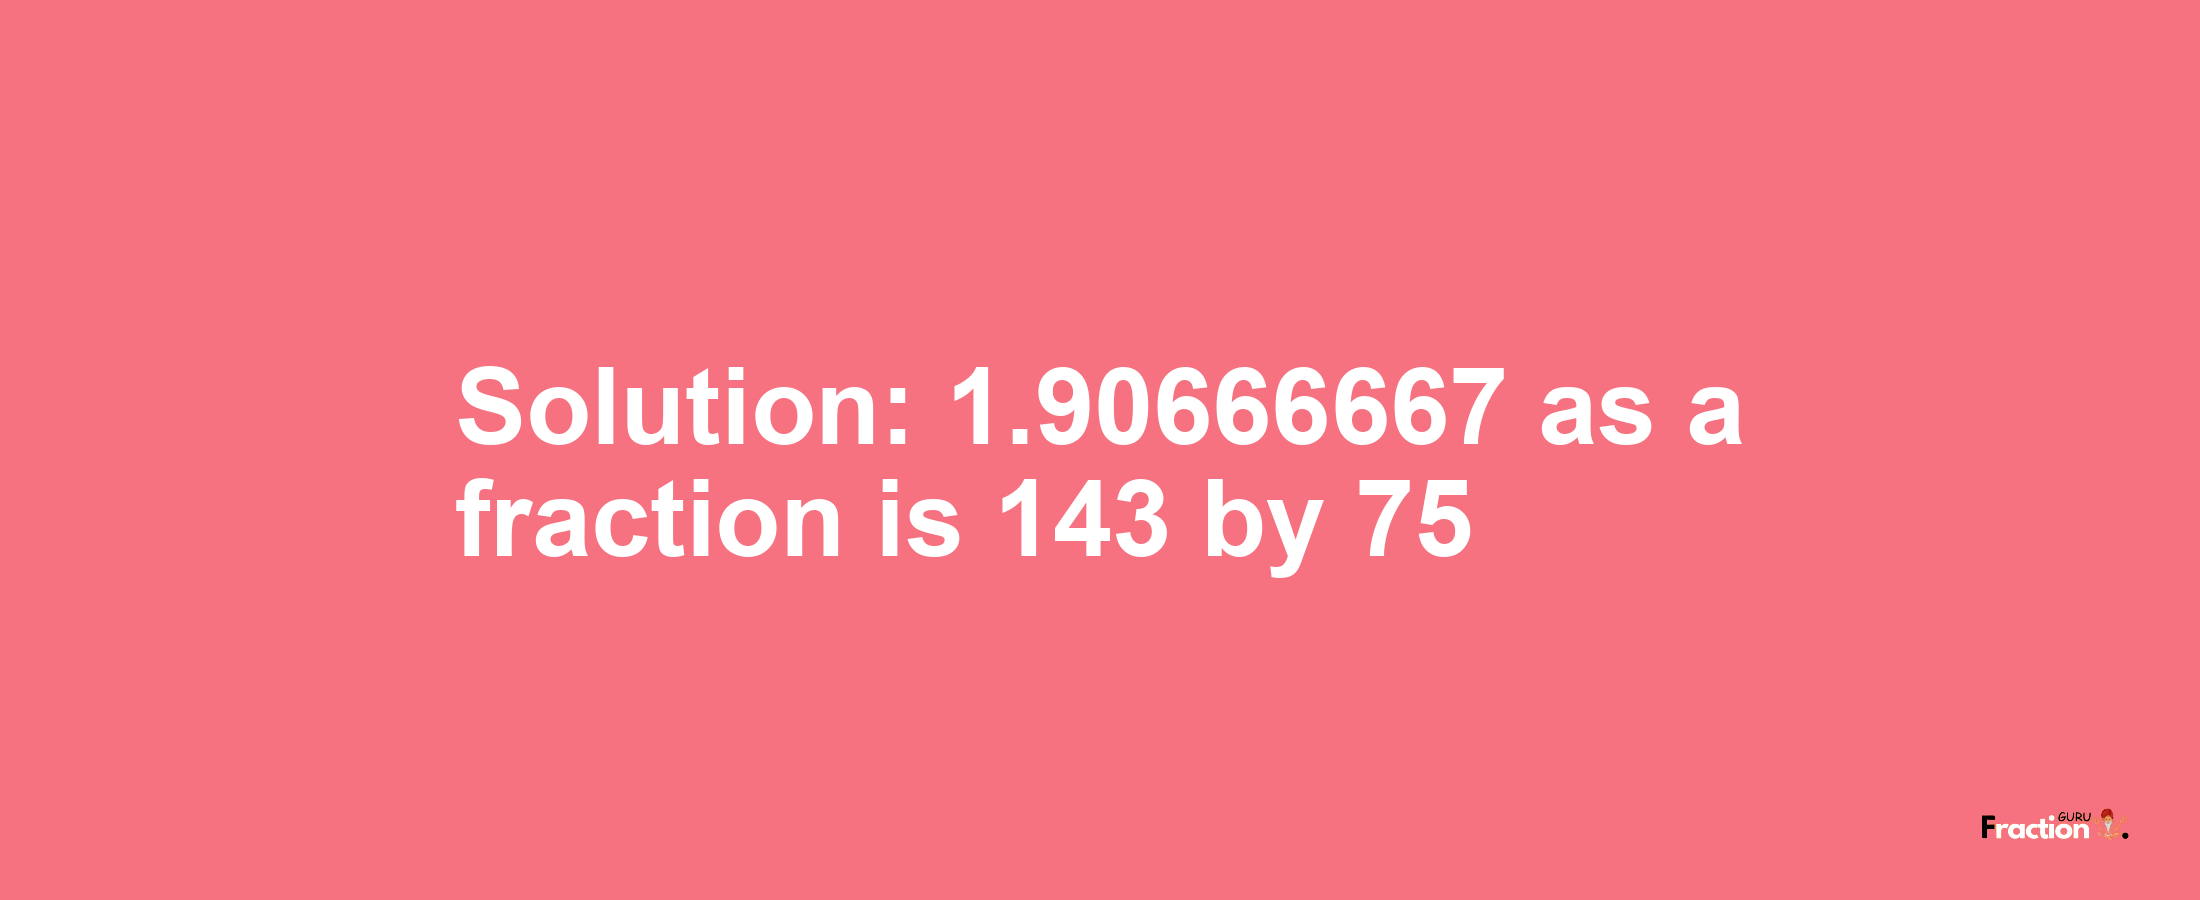 Solution:1.90666667 as a fraction is 143/75